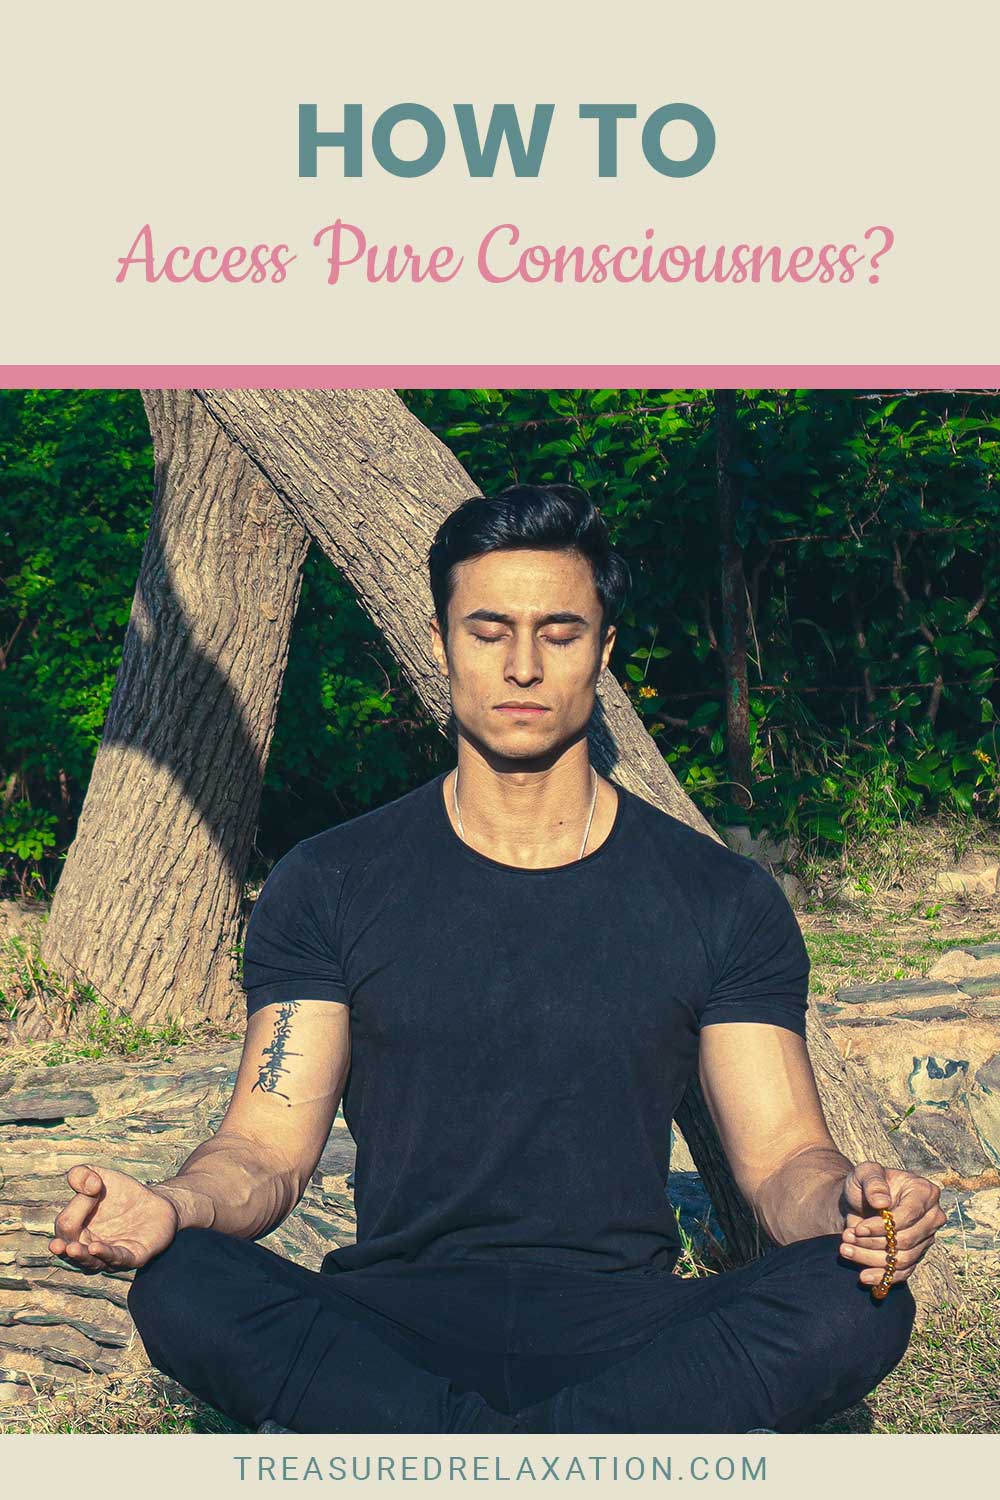 Man in black t-shirt meditating outside - How to Access Pure Consciousness?